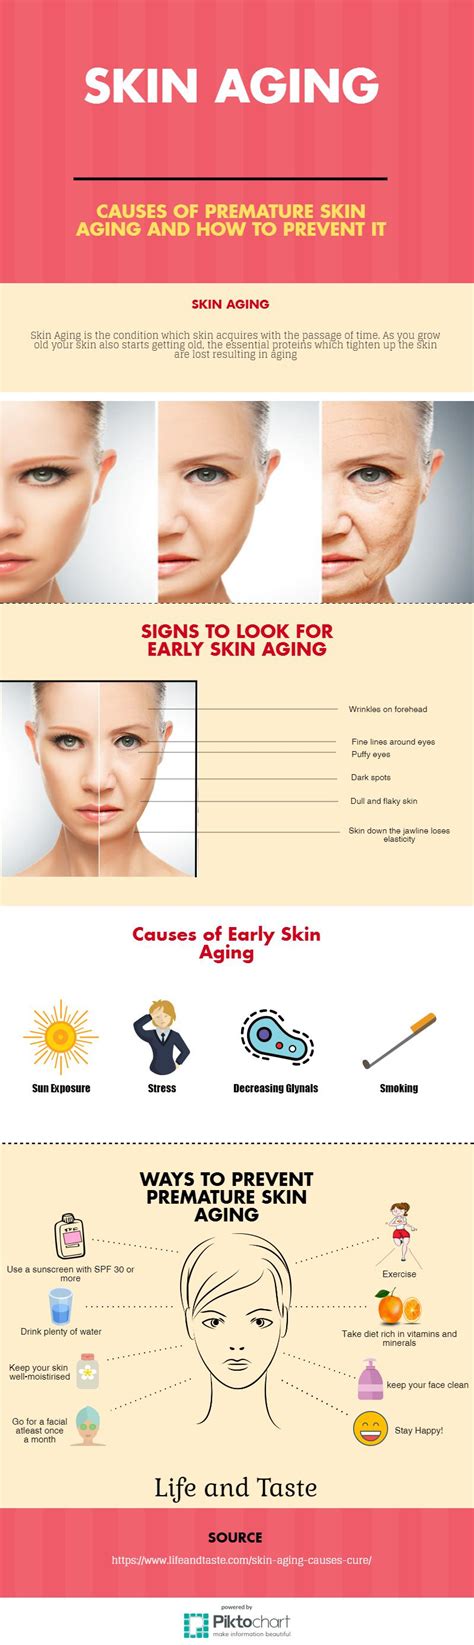 Causes Of Premature Skin Aging And How To Prevent It Premature Skin